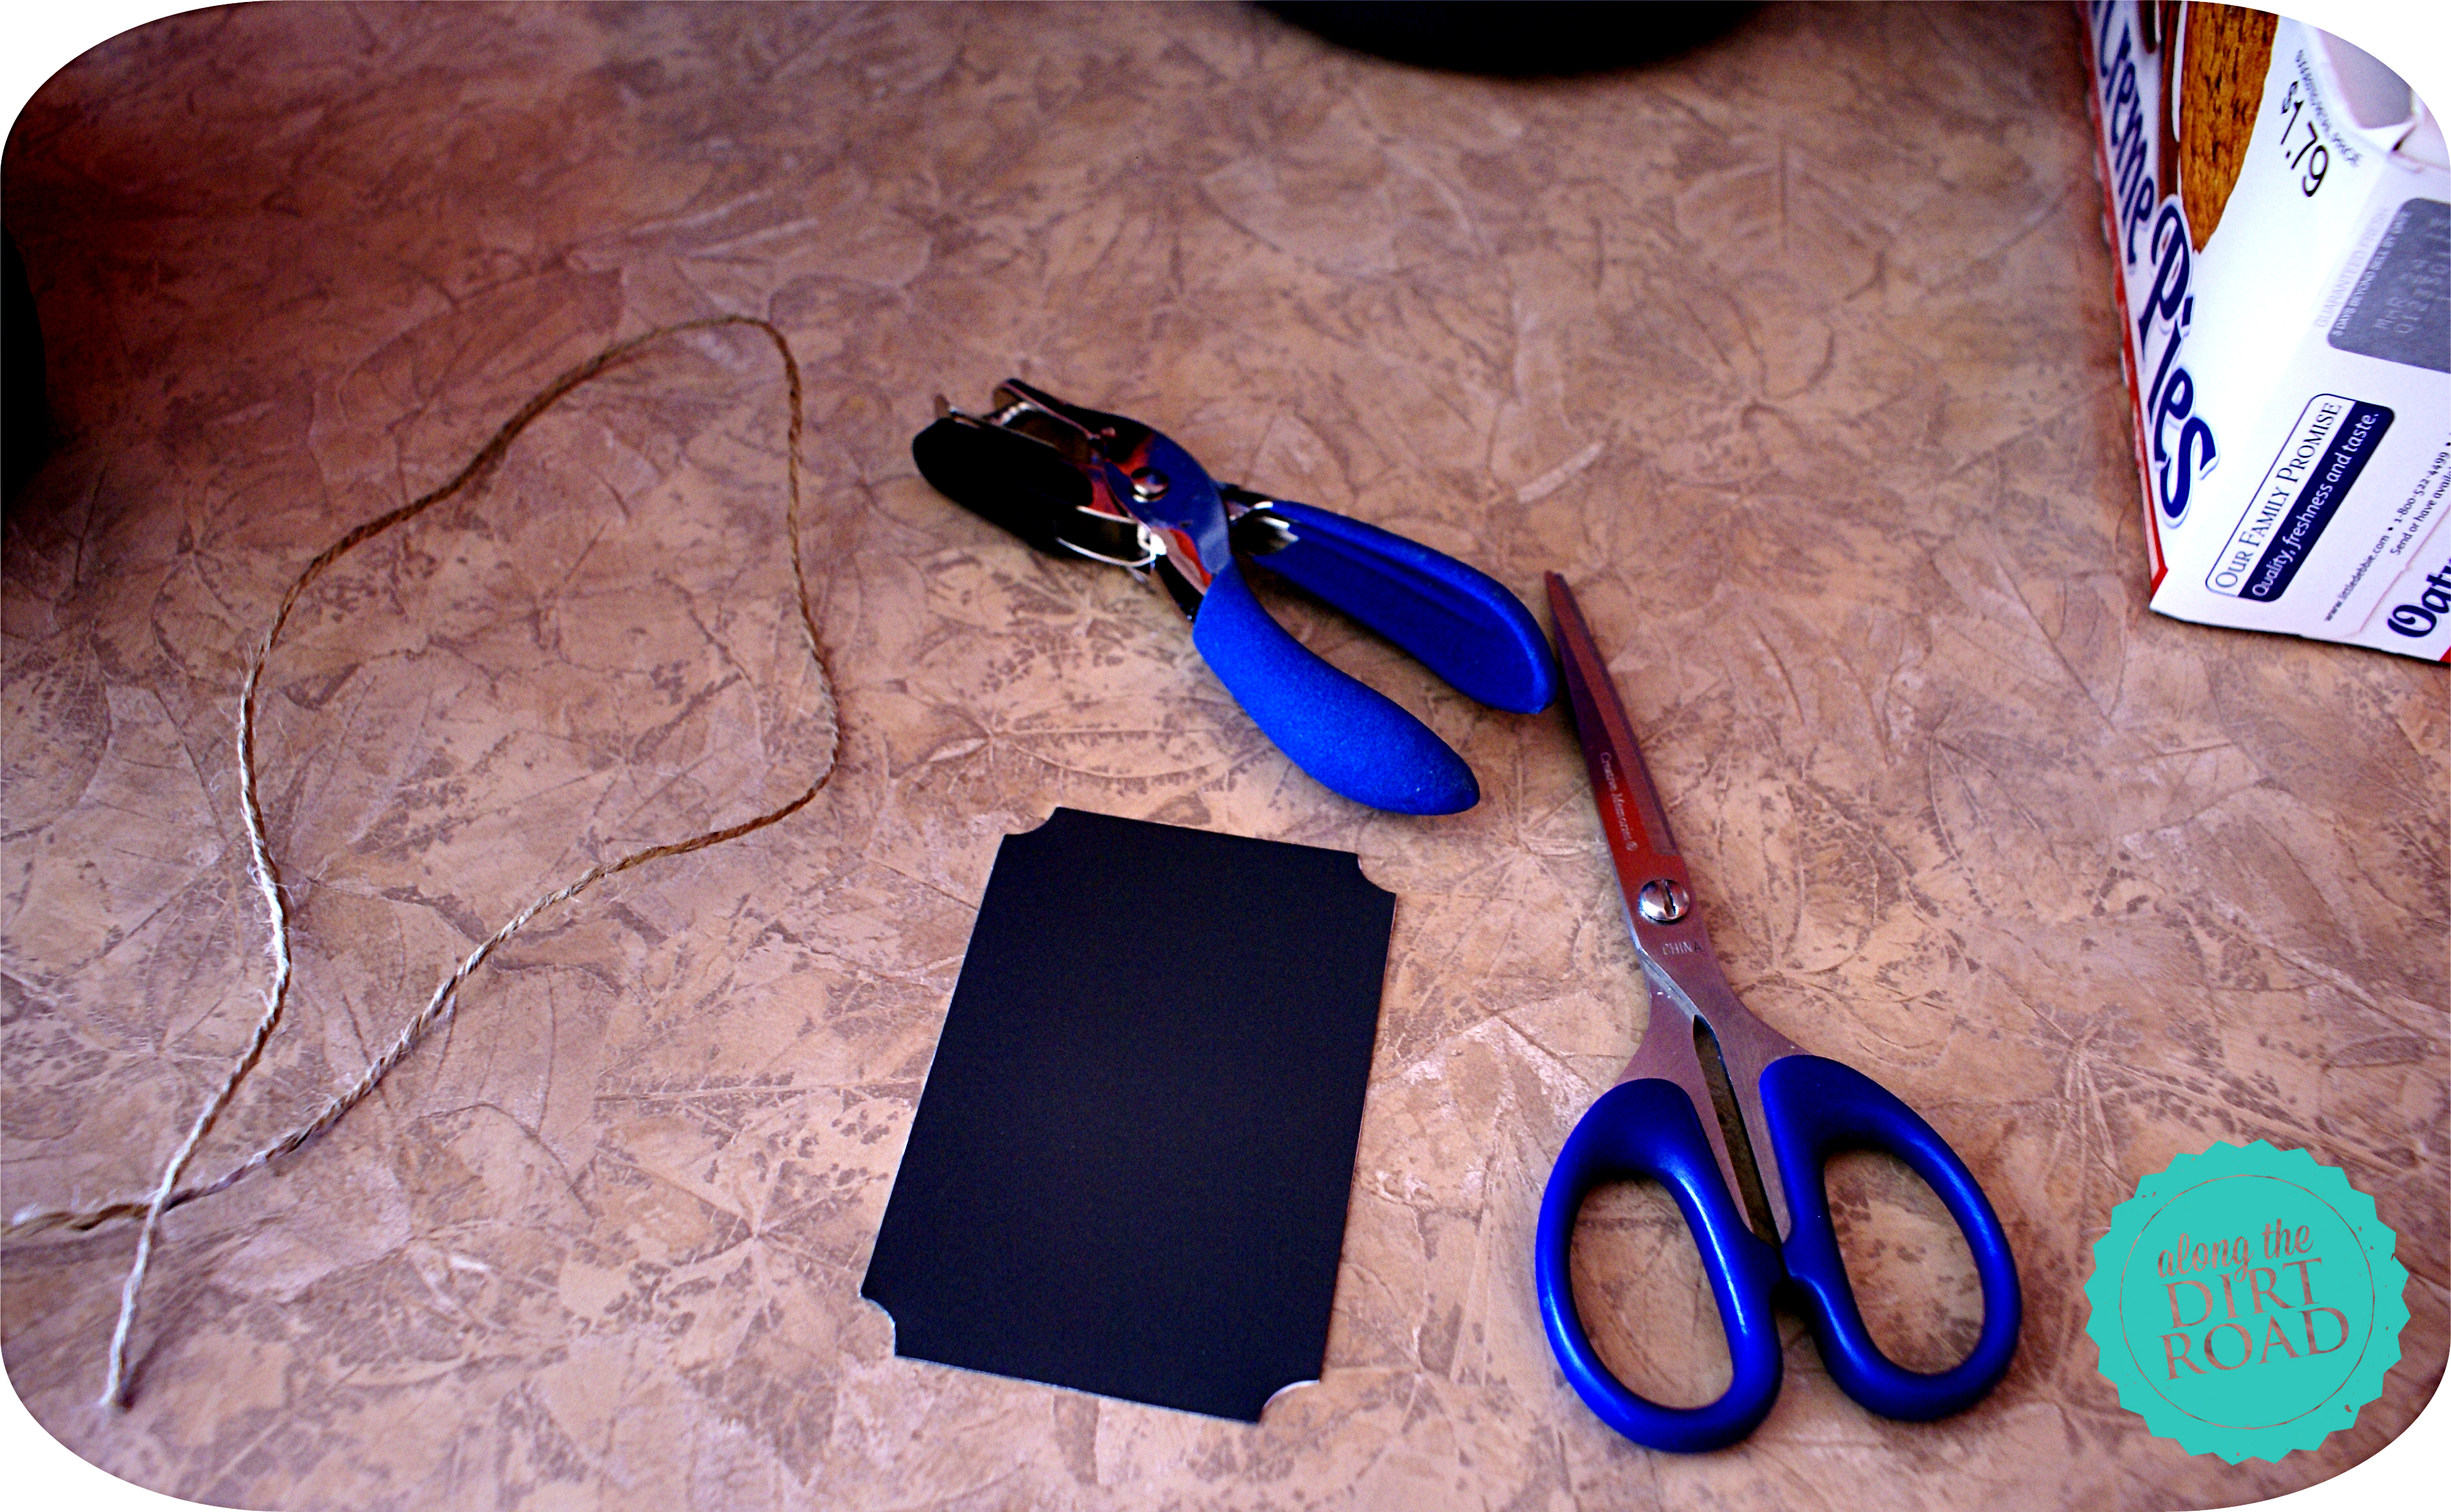 Then....you go down to your craft room and get your scapbooking scissors.  They give you the cleanest edge.